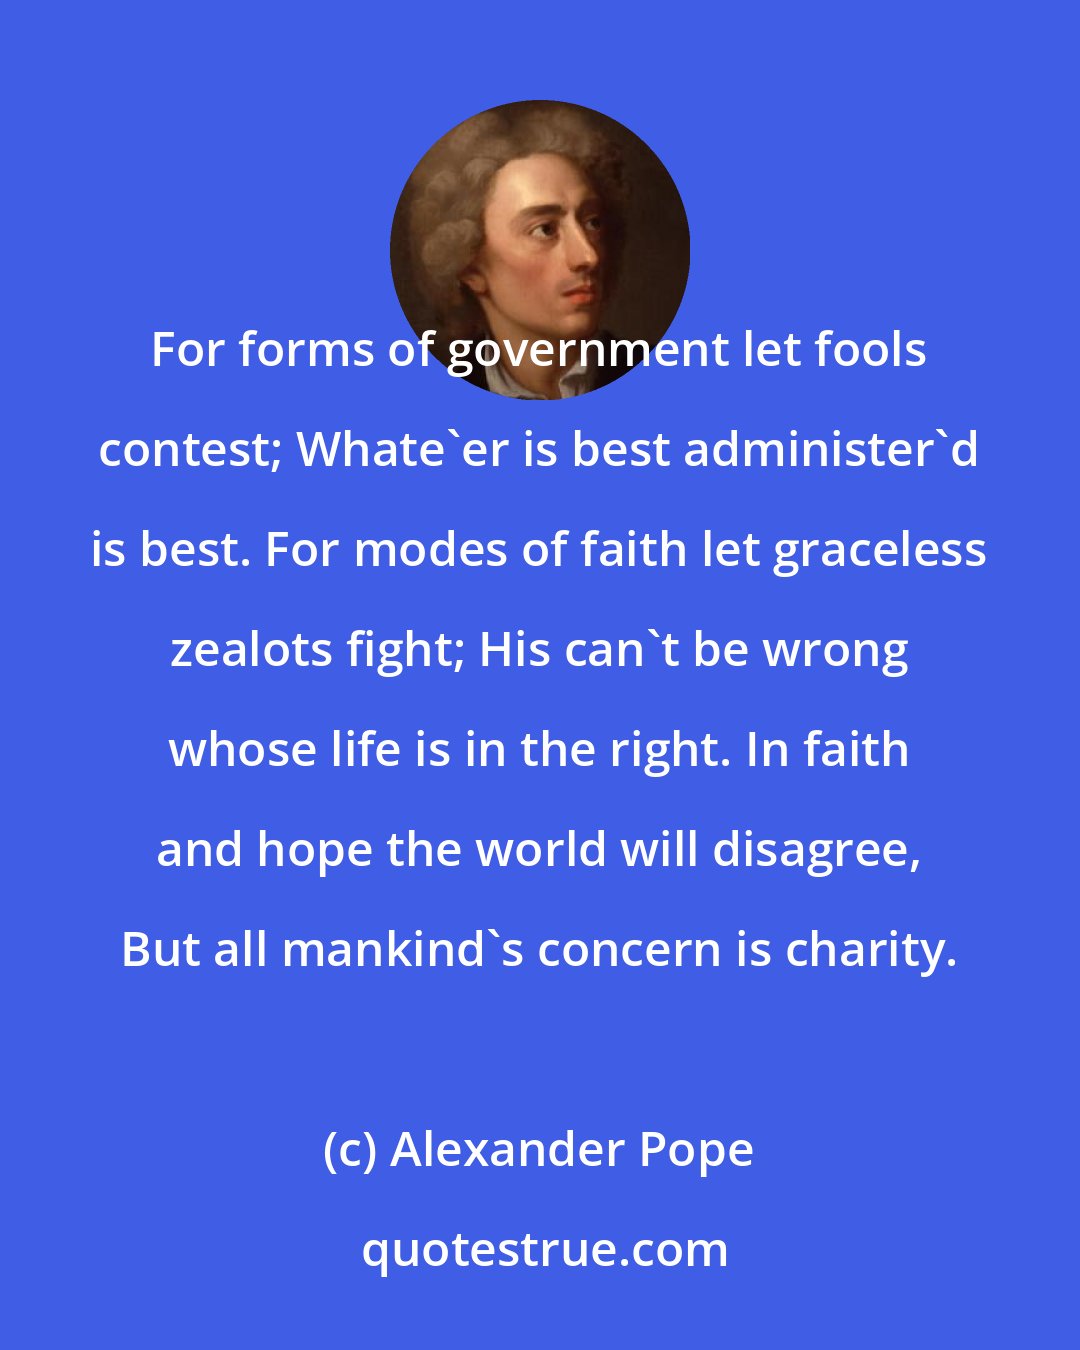 Alexander Pope: For forms of government let fools contest; Whate'er is best administer'd is best. For modes of faith let graceless zealots fight; His can't be wrong whose life is in the right. In faith and hope the world will disagree, But all mankind's concern is charity.